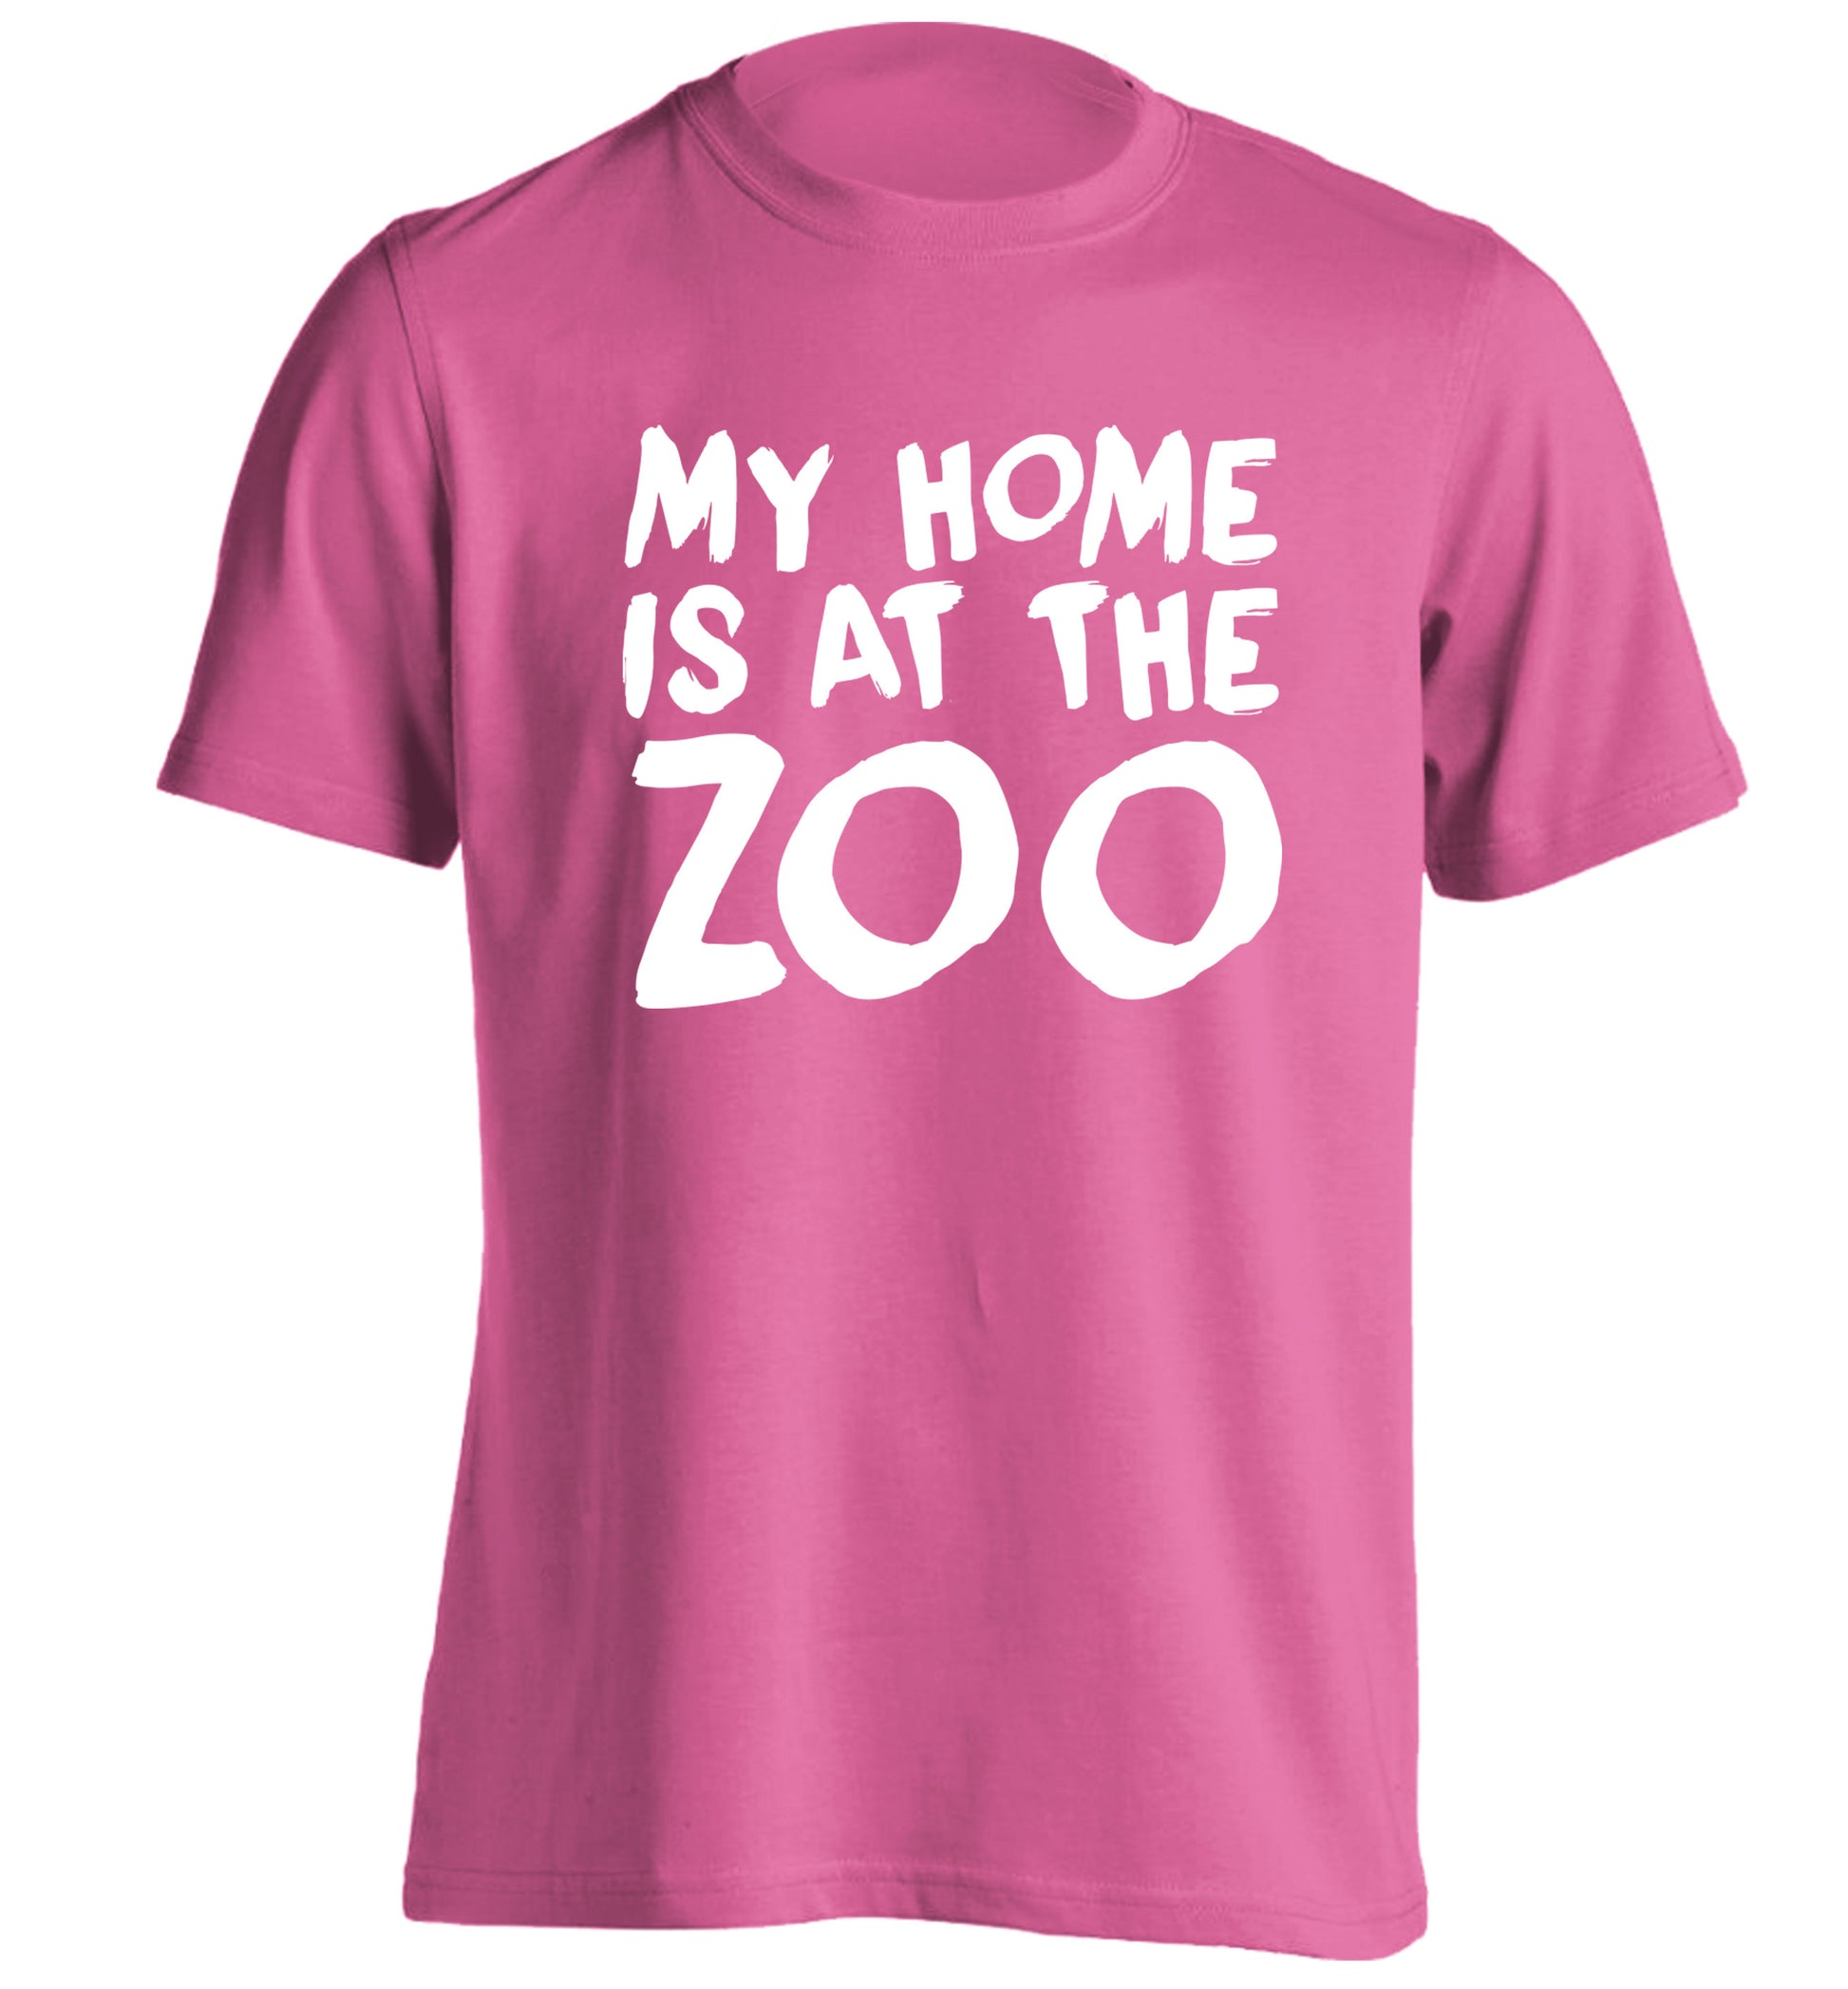 My home is at the zoo adults unisex pink Tshirt 2XL